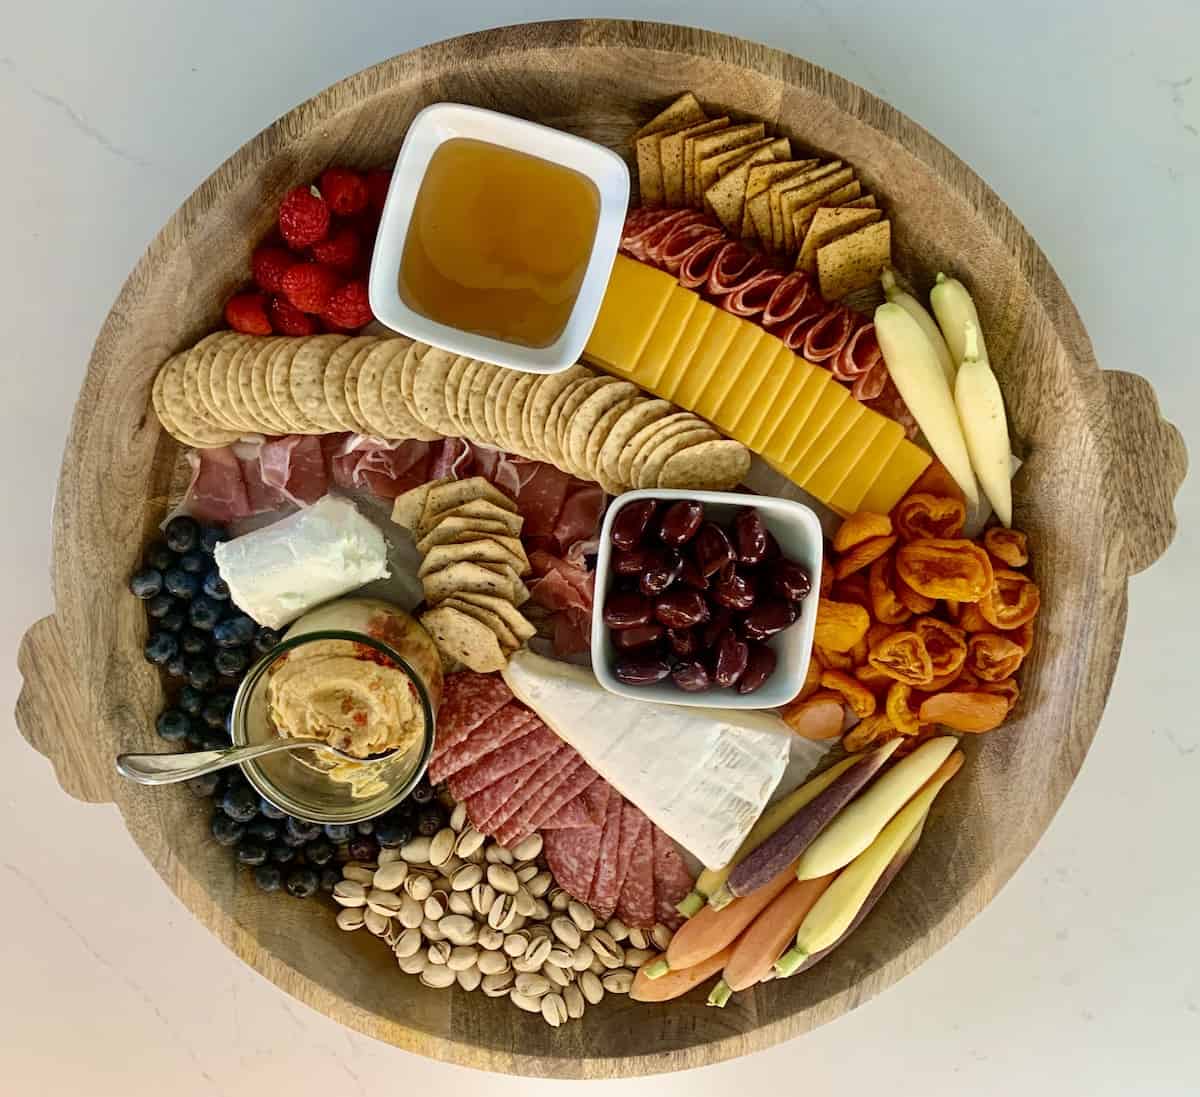 A gluten-free meat and cheese board.